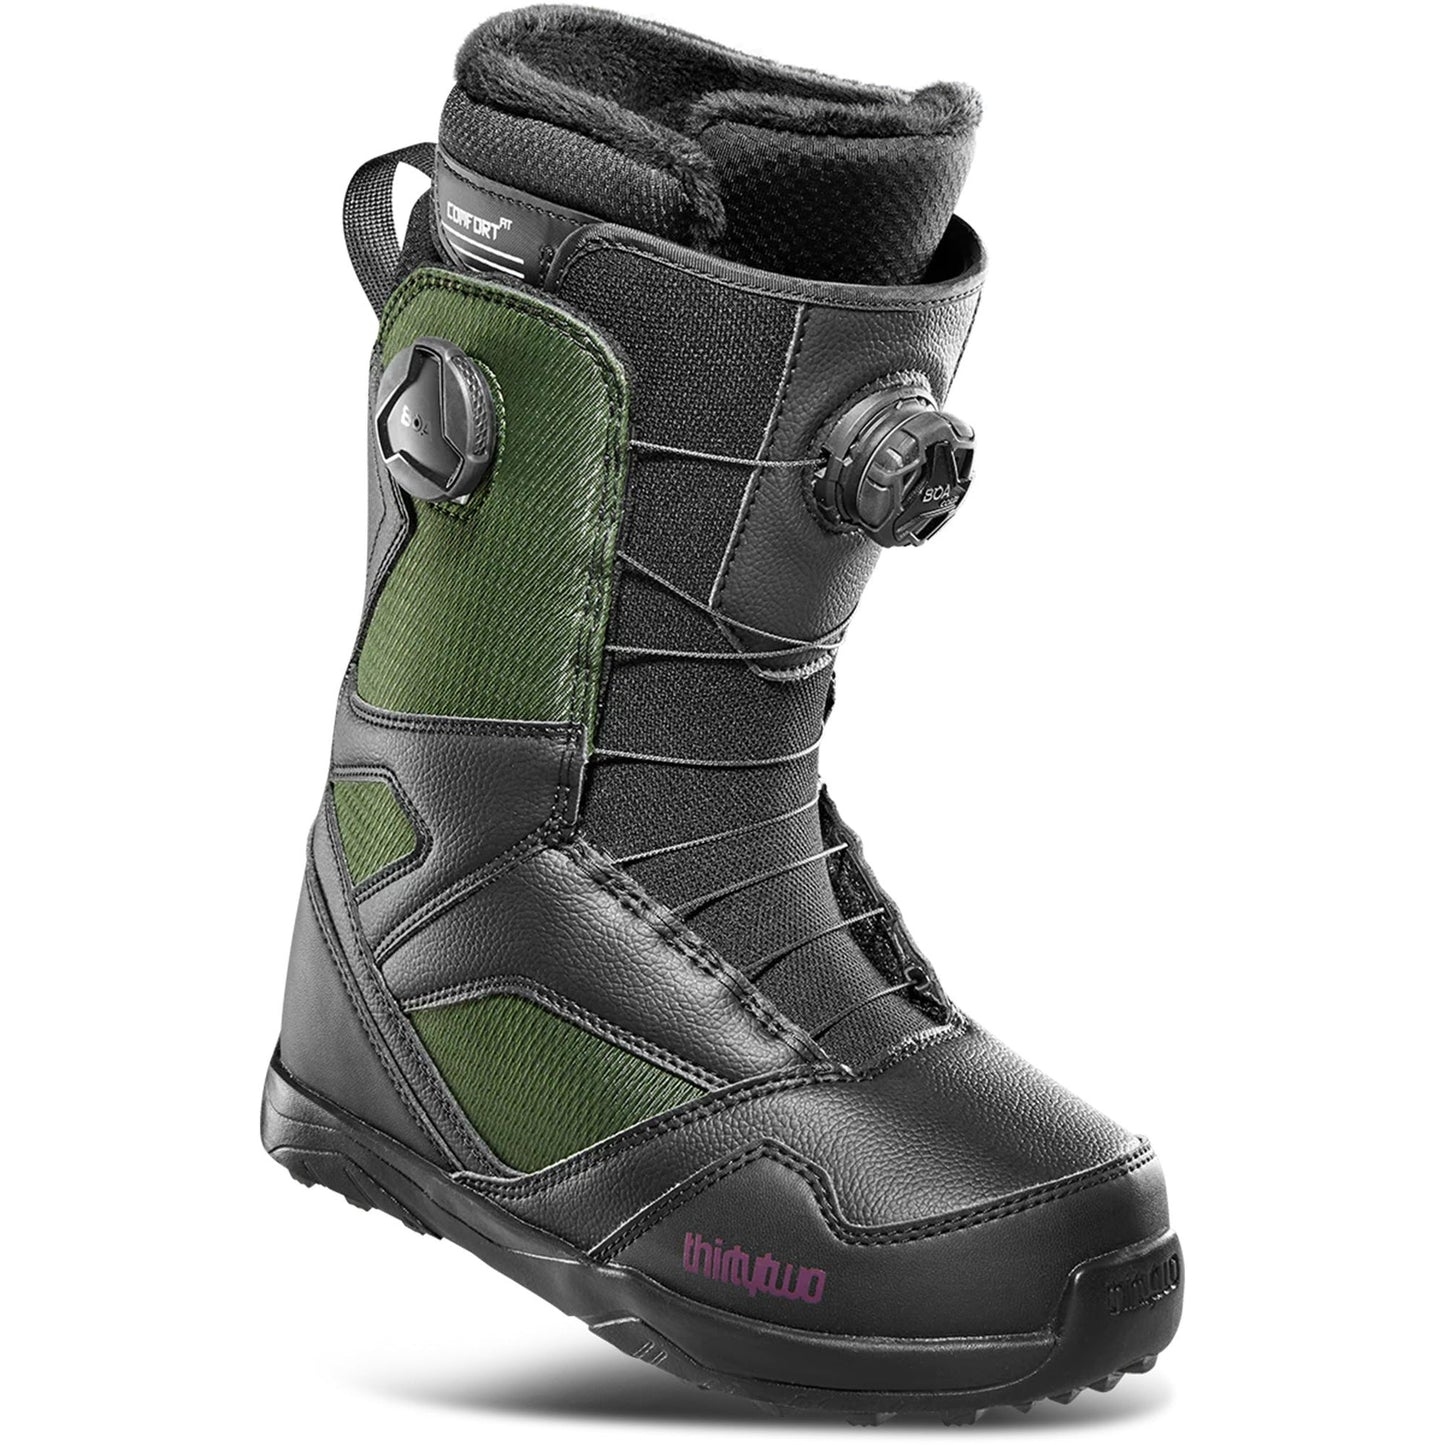 ThirtyTwo Women's STW Double BOA Snowboard Boots - OpenBox Black Green 8.5 Snowboard Boots